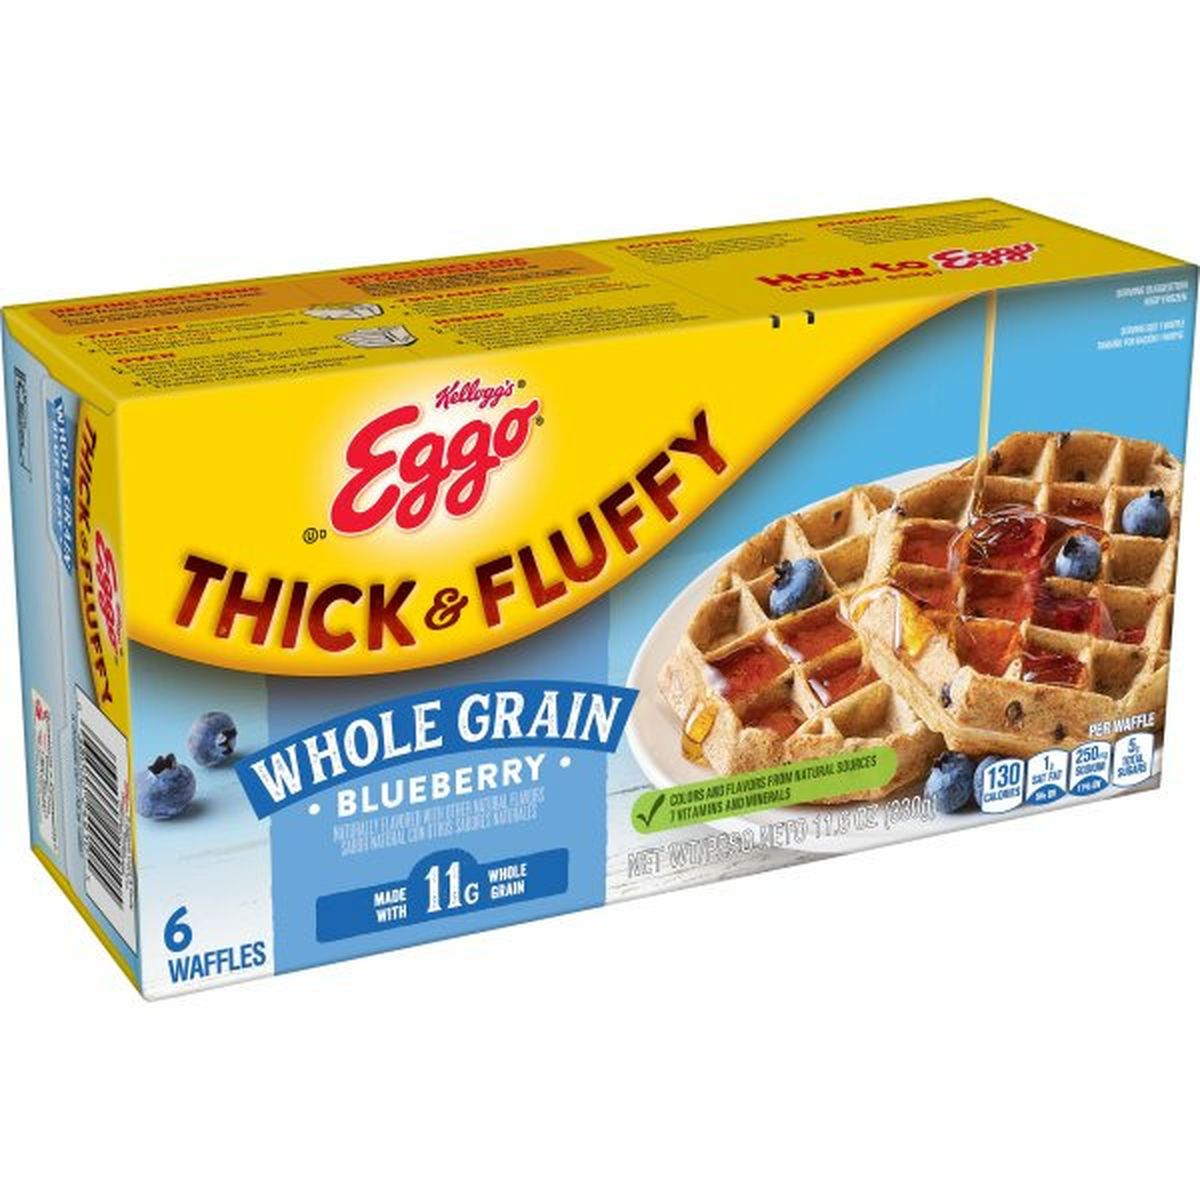 Calories in Eggo Thick and Fluffy Frozen Breakfast Eggo Thick and Fluffy Frozen Waffles, Whole Grain Blueberry, Made with 11g Whole Grain Frozen Breakfast, 11.6oz